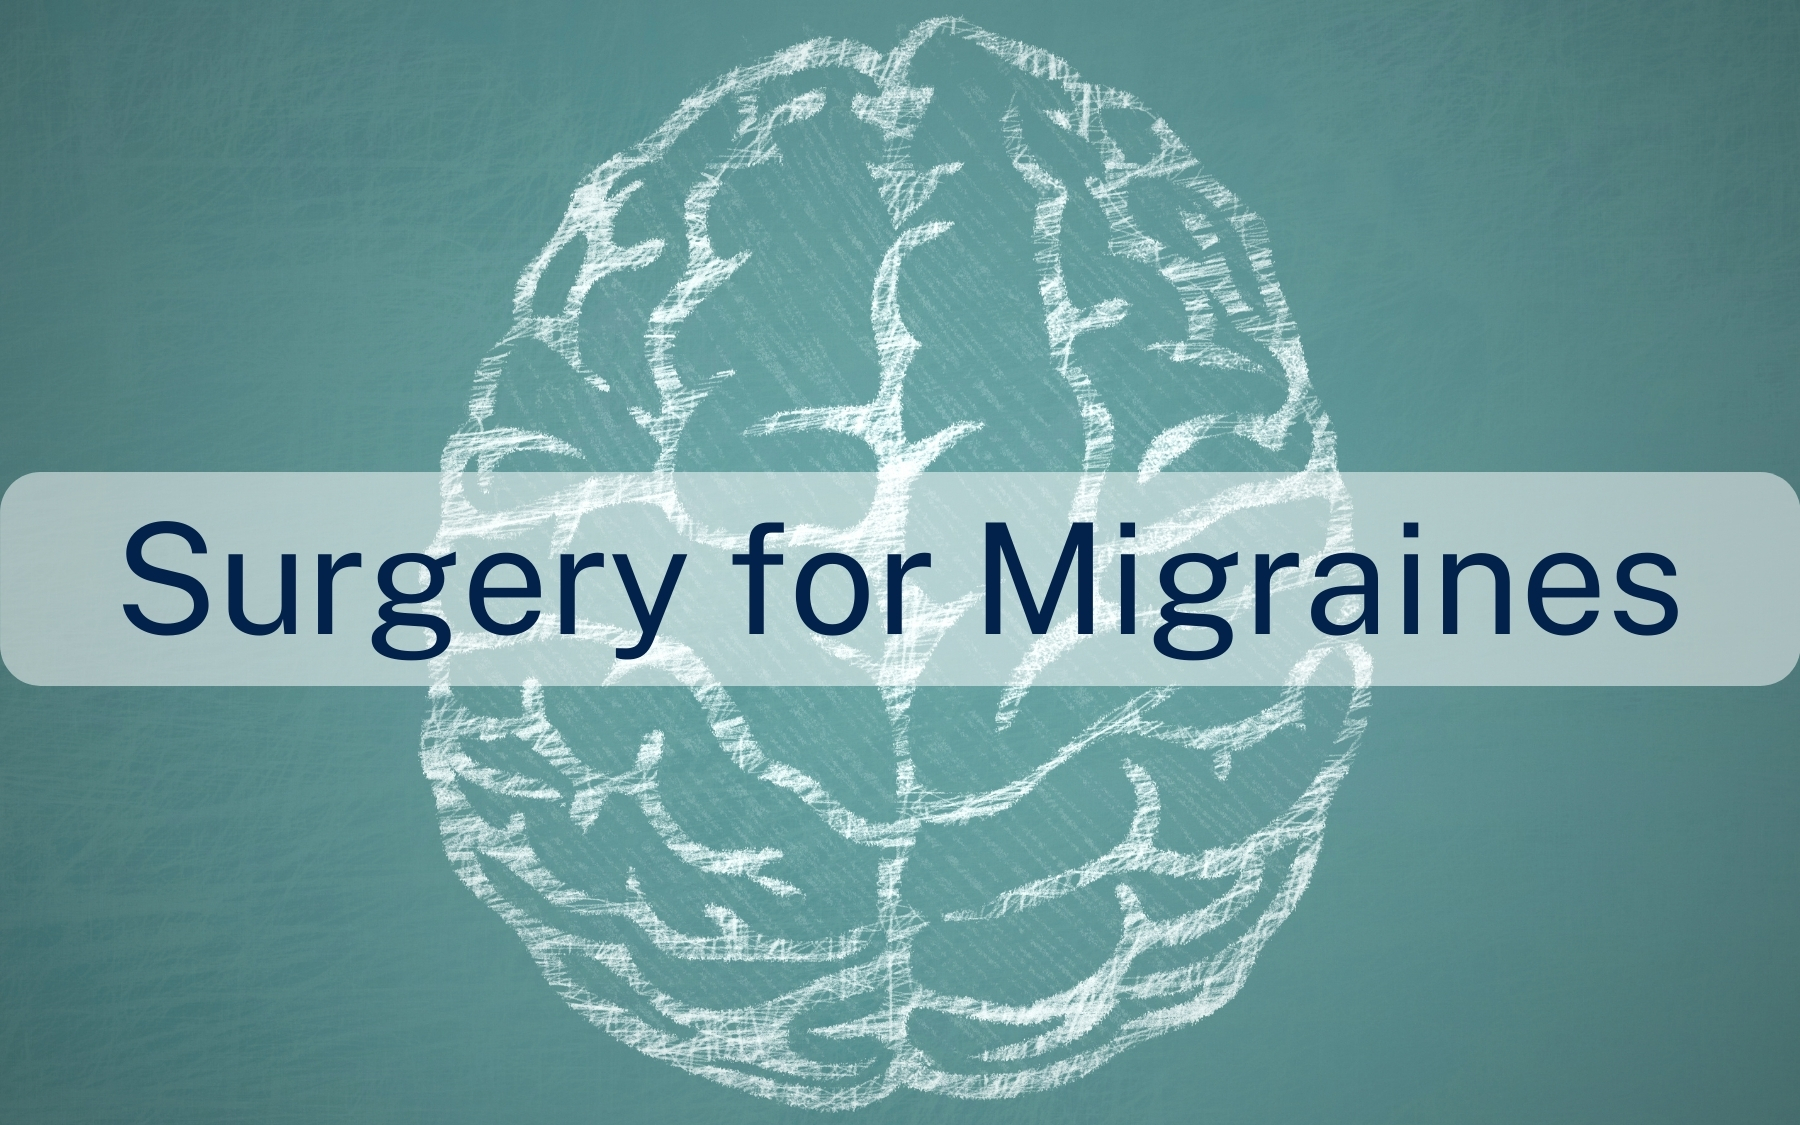 Surgery for migraines